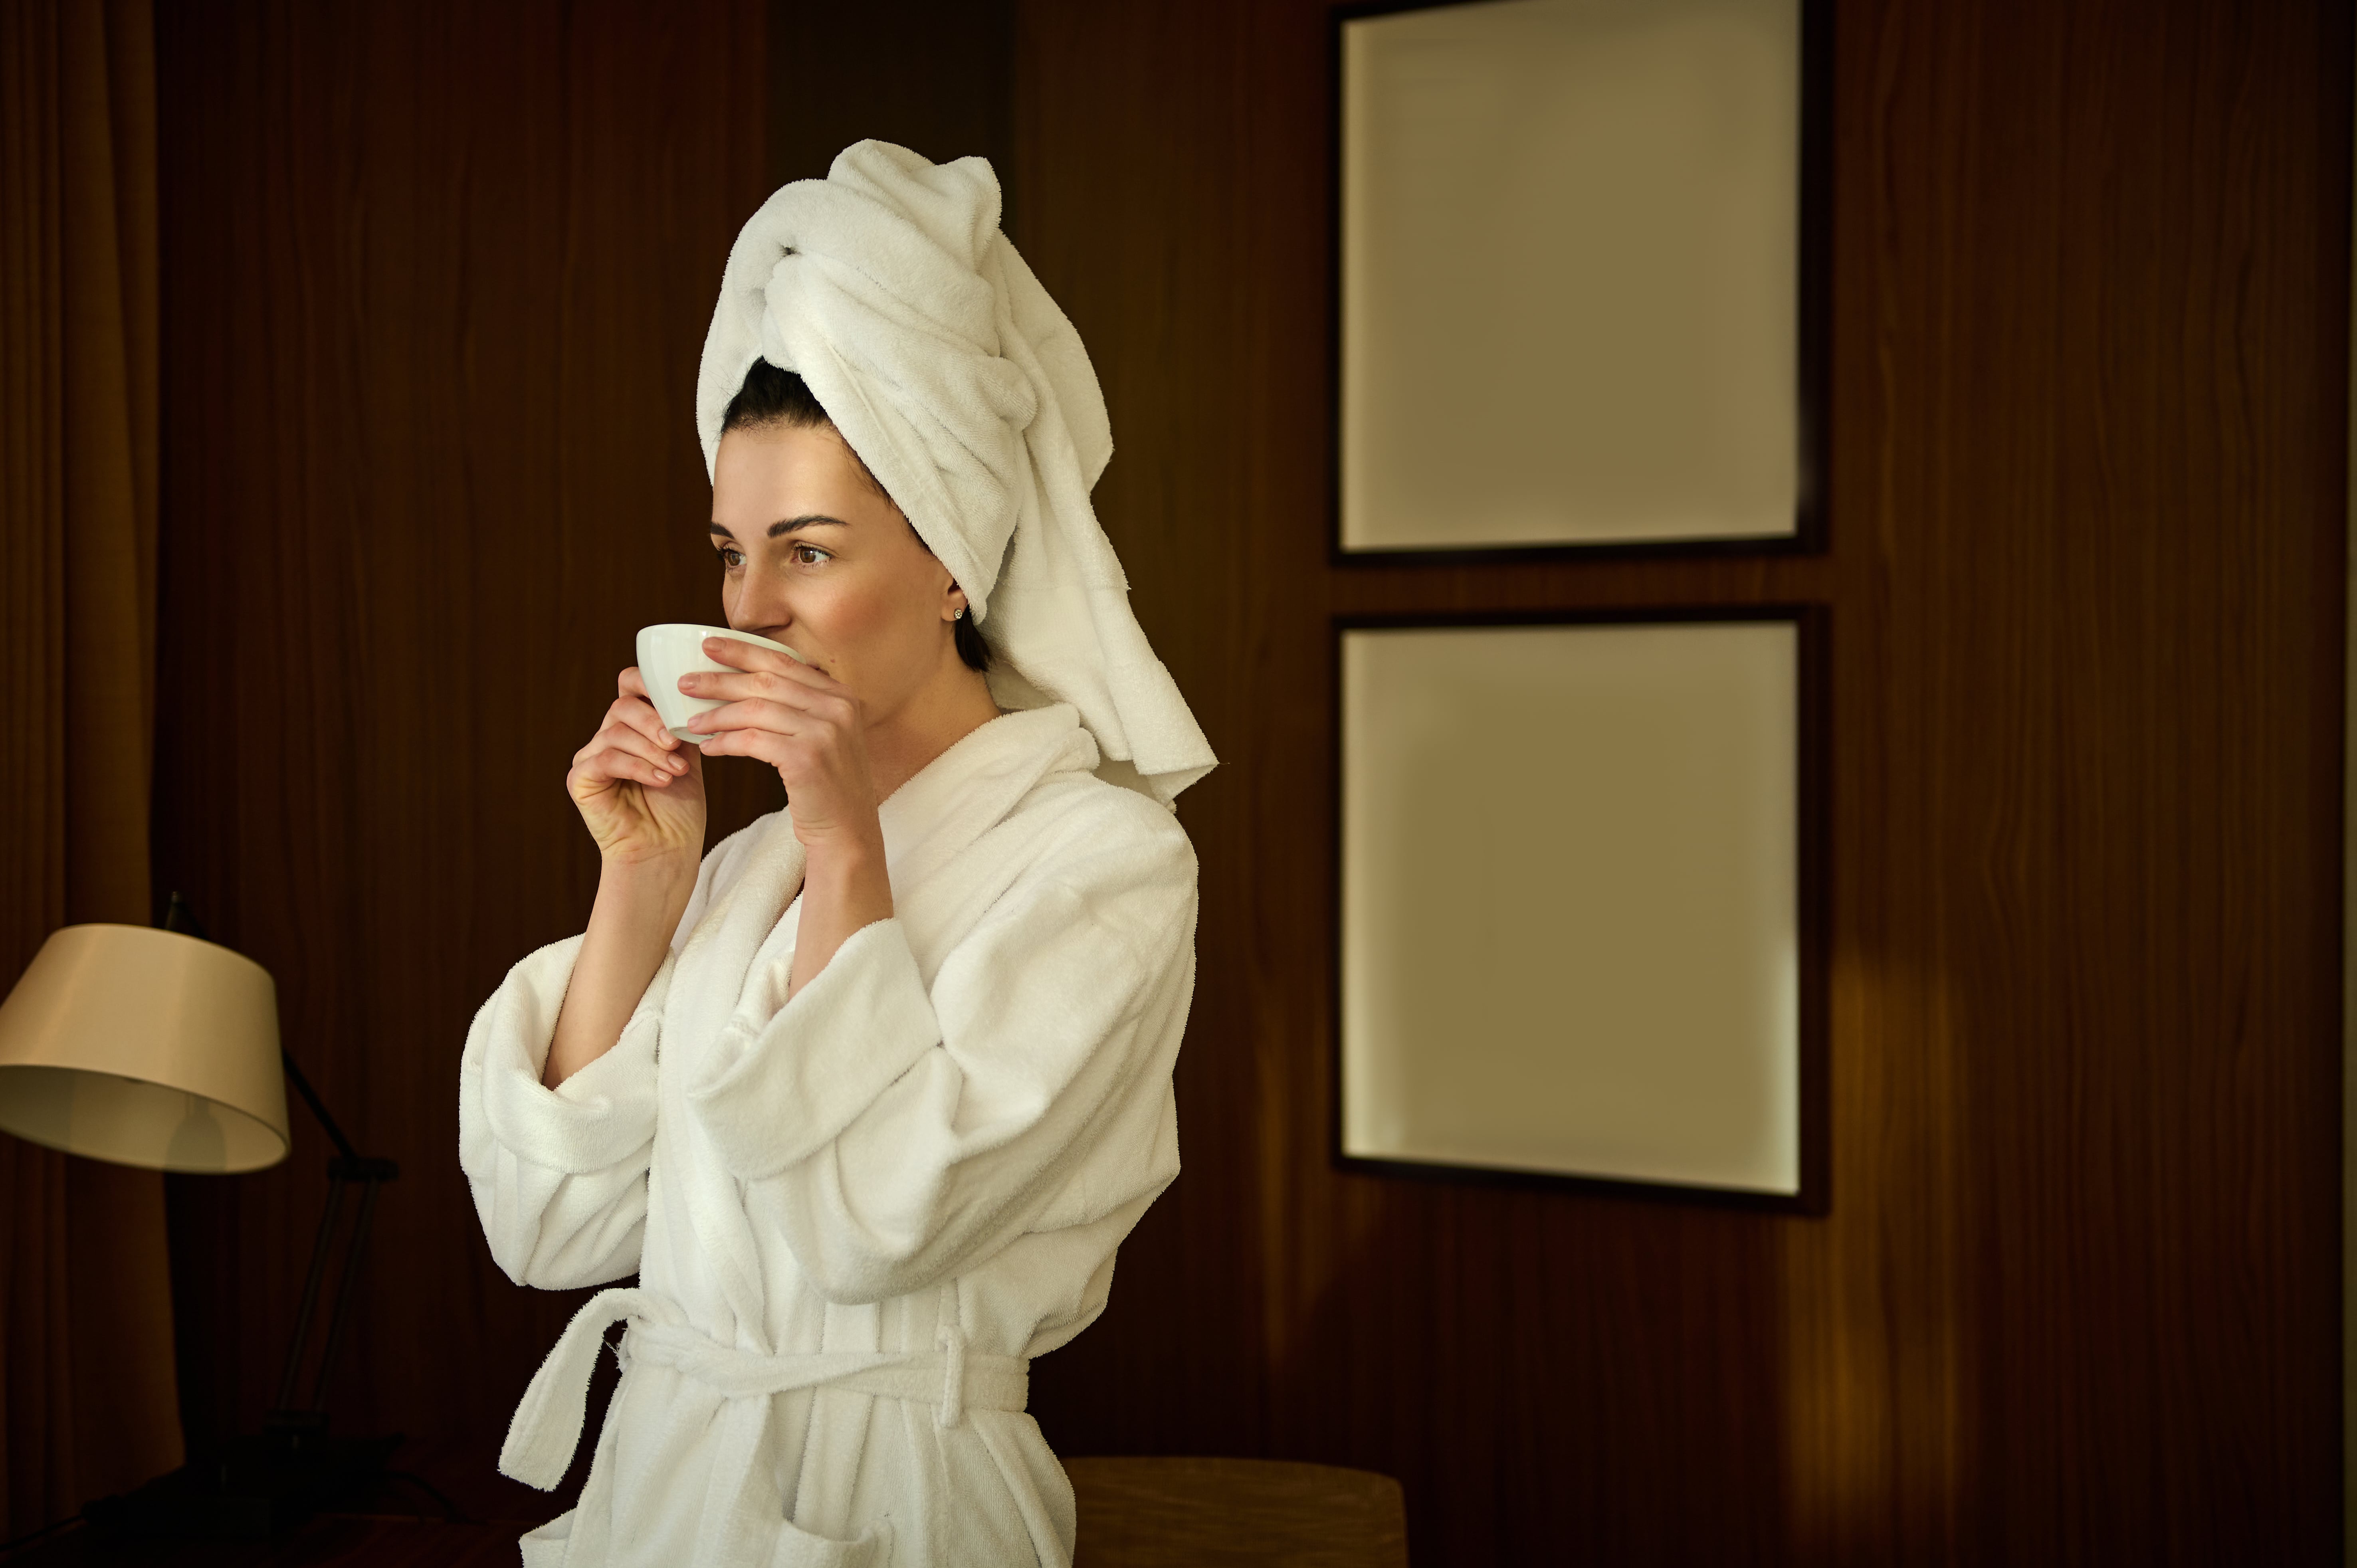 Woman in  bathrobe with head wrapped in a towel drinking from a cup.